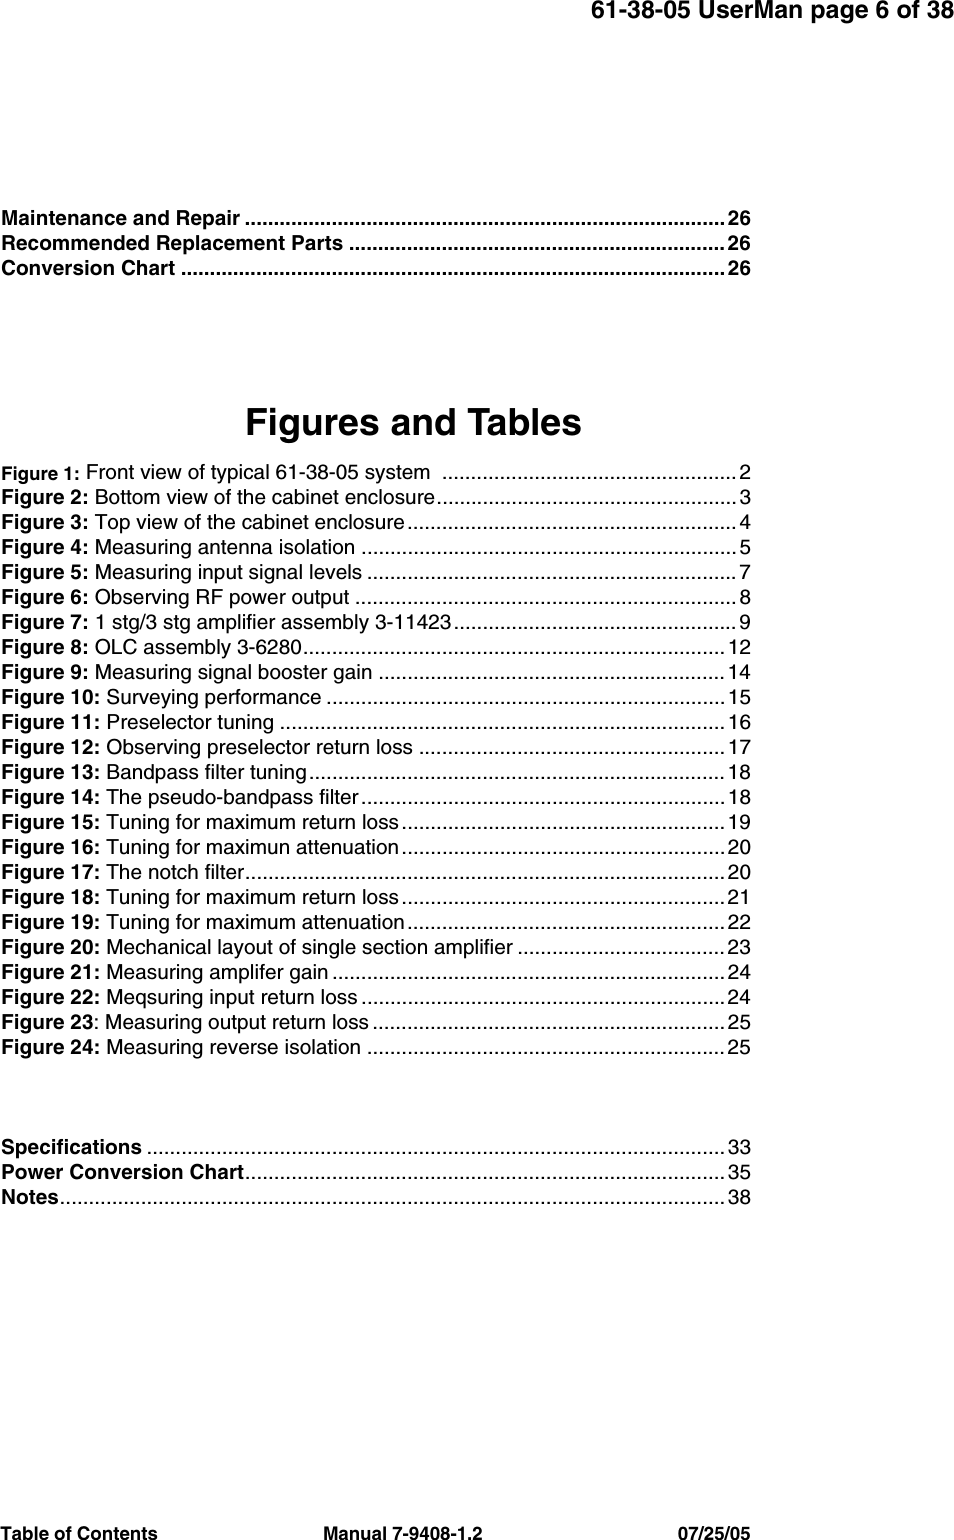 Table of Contents                                 Manual 7-9408-1.2                                       07/25/0561-38-05 UserMan page 6 of 38Maintenance and Repair ................................................................................... 26Recommended Replacement Parts ................................................................. 26Conversion Chart .............................................................................................. 26Figures and TablesFigure 1: Front view of typical 61-38-05 system  ................................................... 2Figure 2: Bottom view of the cabinet enclosure.................................................... 3Figure 3: Top view of the cabinet enclosure......................................................... 4Figure 4: Measuring antenna isolation ................................................................. 5Figure 5: Measuring input signal levels ................................................................ 7Figure 6: Observing RF power output .................................................................. 8Figure 7: 1 stg/3 stg amplifier assembly 3-11423................................................. 9Figure 8: OLC assembly 3-6280......................................................................... 12Figure 9: Measuring signal booster gain ............................................................ 14Figure 10: Surveying performance .....................................................................15Figure 11: Preselector tuning ............................................................................. 16Figure 12: Observing preselector return loss ..................................................... 17Figure 13: Bandpass filter tuning........................................................................18Figure 14: The pseudo-bandpass filter...............................................................18Figure 15: Tuning for maximum return loss ........................................................19Figure 16: Tuning for maximun attenuation ........................................................ 20Figure 17: The notch filter................................................................................... 20Figure 18: Tuning for maximum return loss ........................................................21Figure 19: Tuning for maximum attenuation ....................................................... 22Figure 20: Mechanical layout of single section amplifier ....................................23Figure 21: Measuring amplifer gain .................................................................... 24Figure 22: Meqsuring input return loss ...............................................................24Figure 23: Measuring output return loss ............................................................. 25Figure 24: Measuring reverse isolation ..............................................................25Specifications .................................................................................................... 33Power Conversion Chart................................................................................... 35Notes................................................................................................................... 38